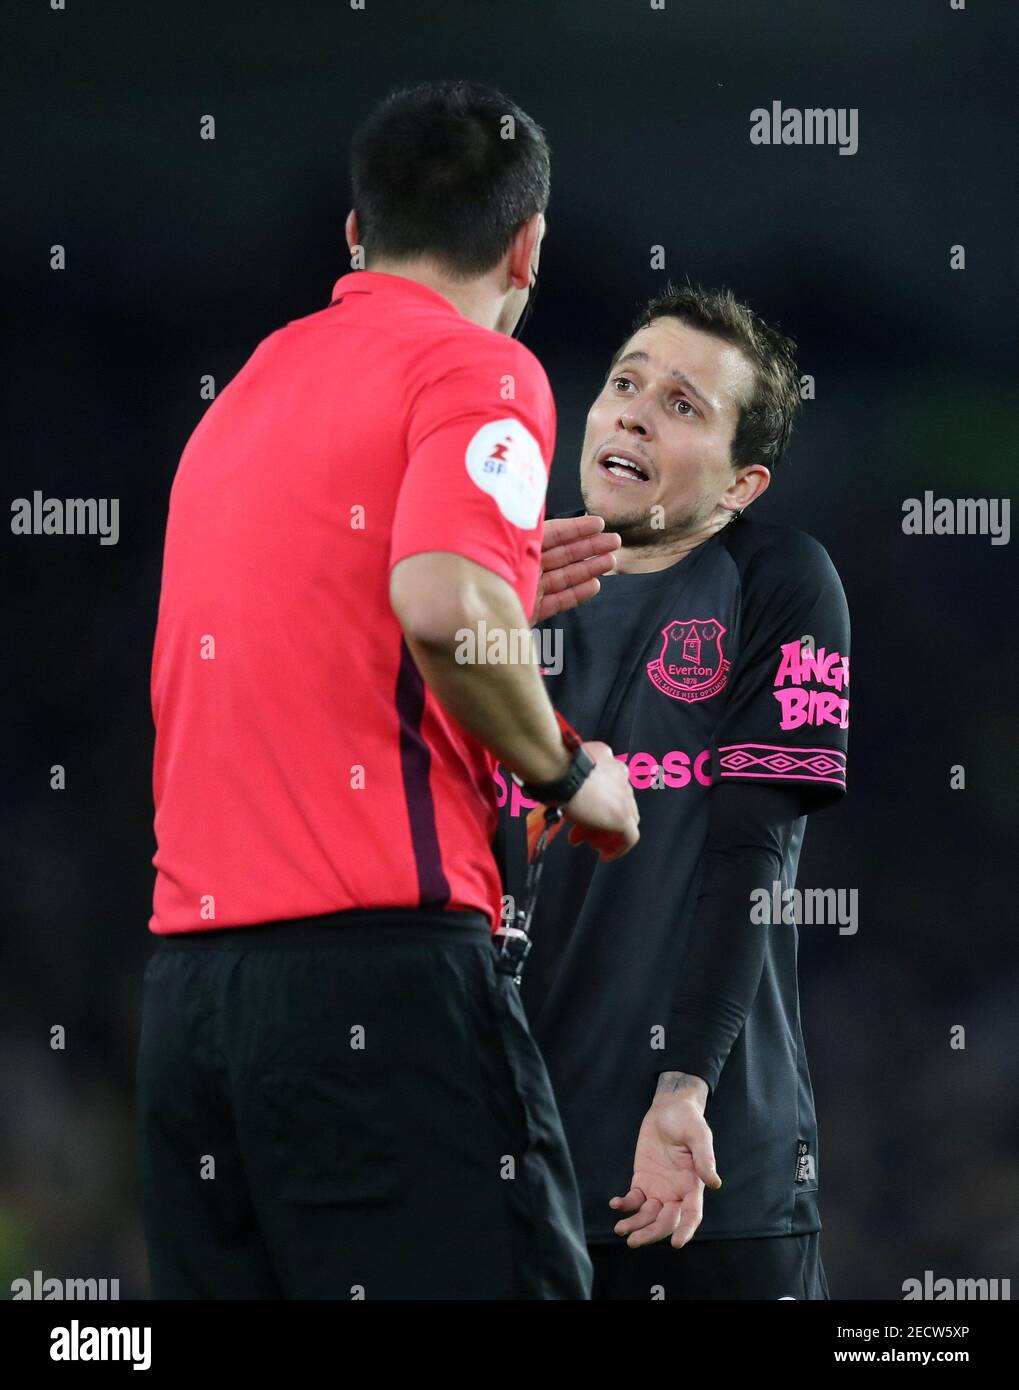 Soccer Football - Premier League - Brighton & Hove Albion v Everton - The American Express Community Stadium, Brighton, Britain - December 29, 2018  Everton's Bernard protests with referee Andrew Madley before being shown a yellow card        Action Images via Reuters/Peter Cziborra  EDITORIAL USE ONLY. No use with unauthorized audio, video, data, fixture lists, club/league logos or 'live' services. Online in-match use limited to 75 images, no video emulation. No use in betting, games or single club/league/player publications.  Please contact your account representative for further details. Stock Photo